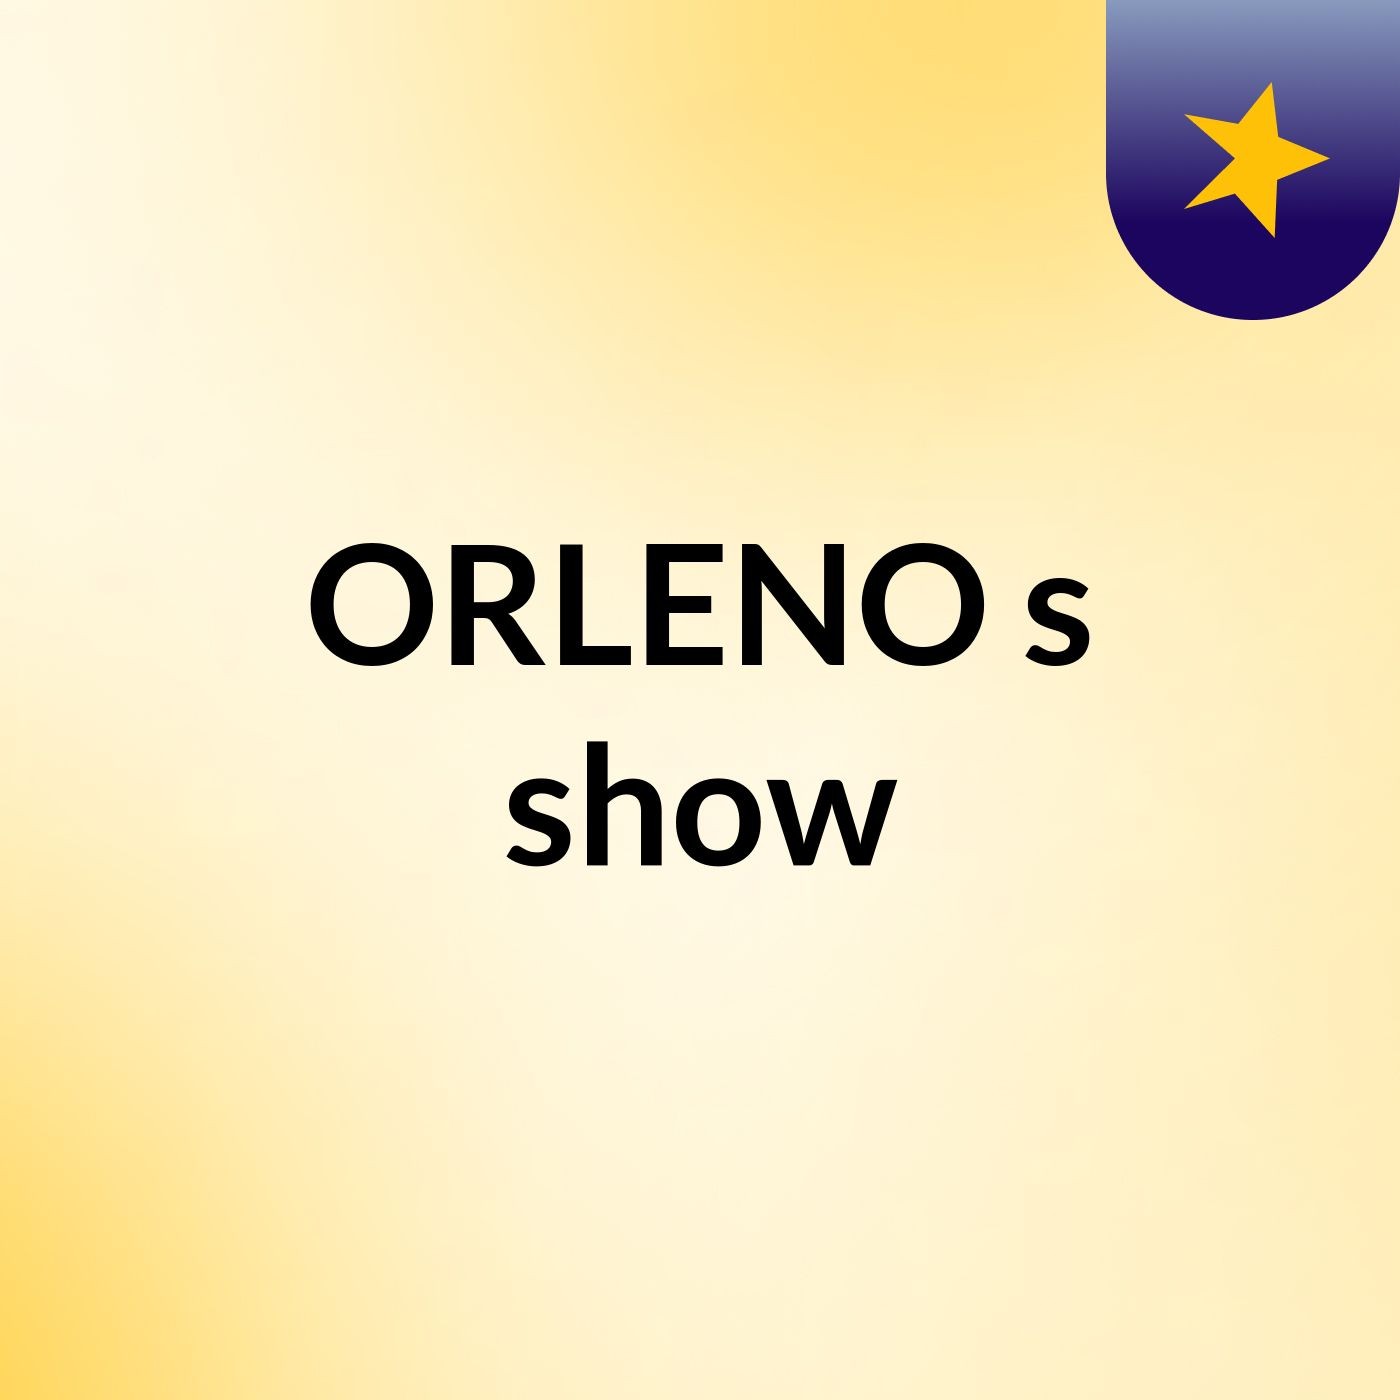 ORLENO's show